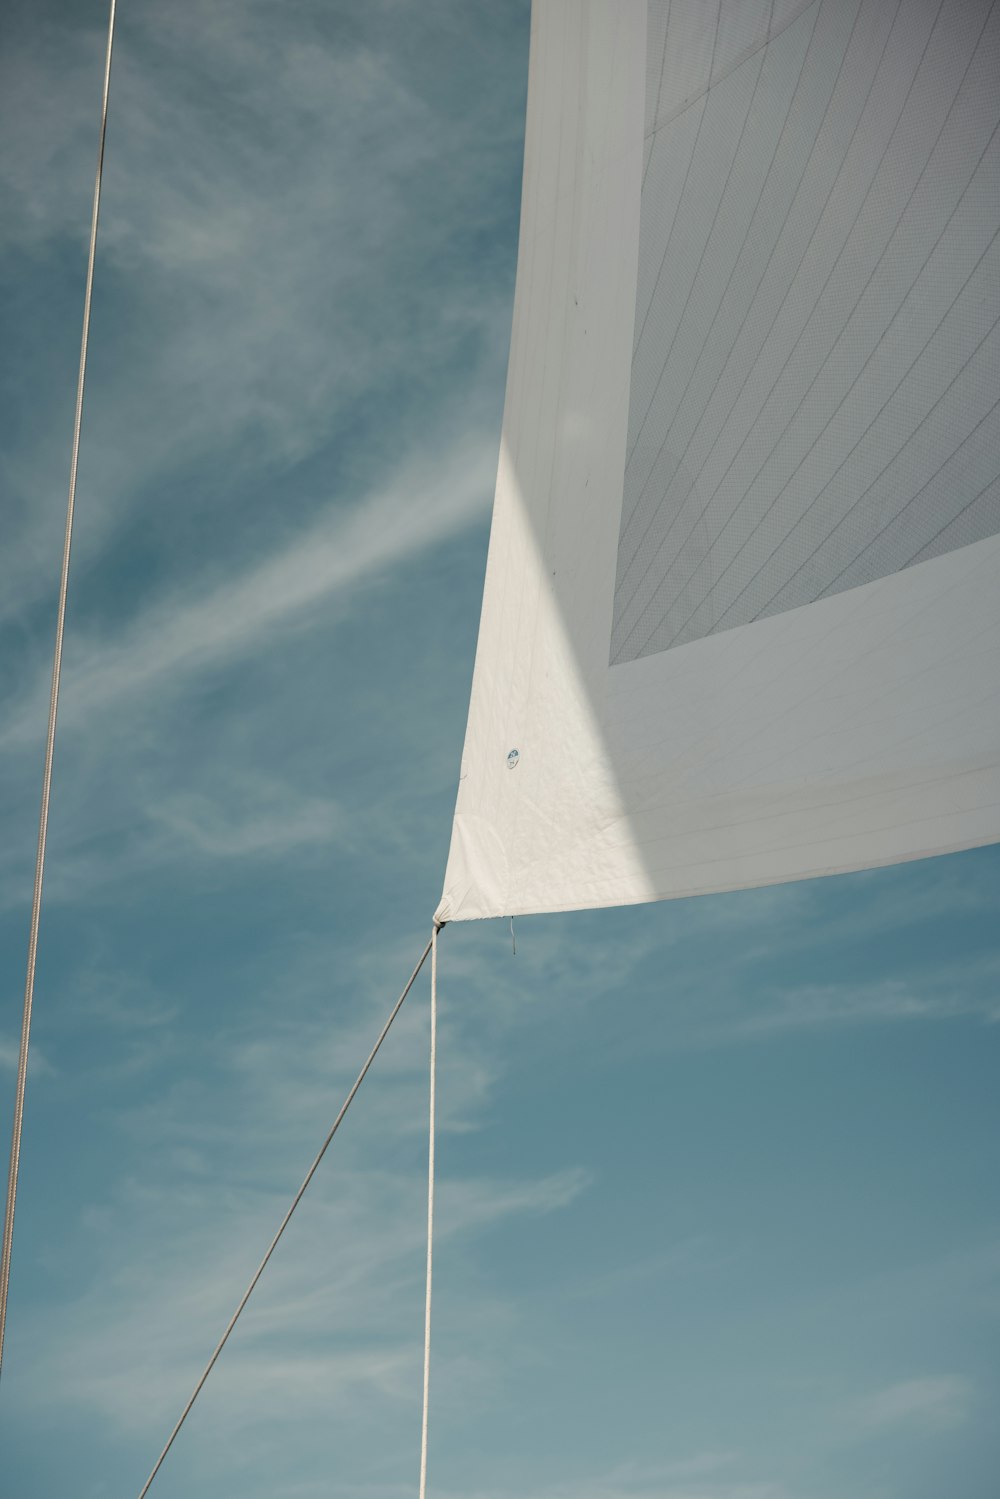 a sail boat sails in the wind on a sunny day